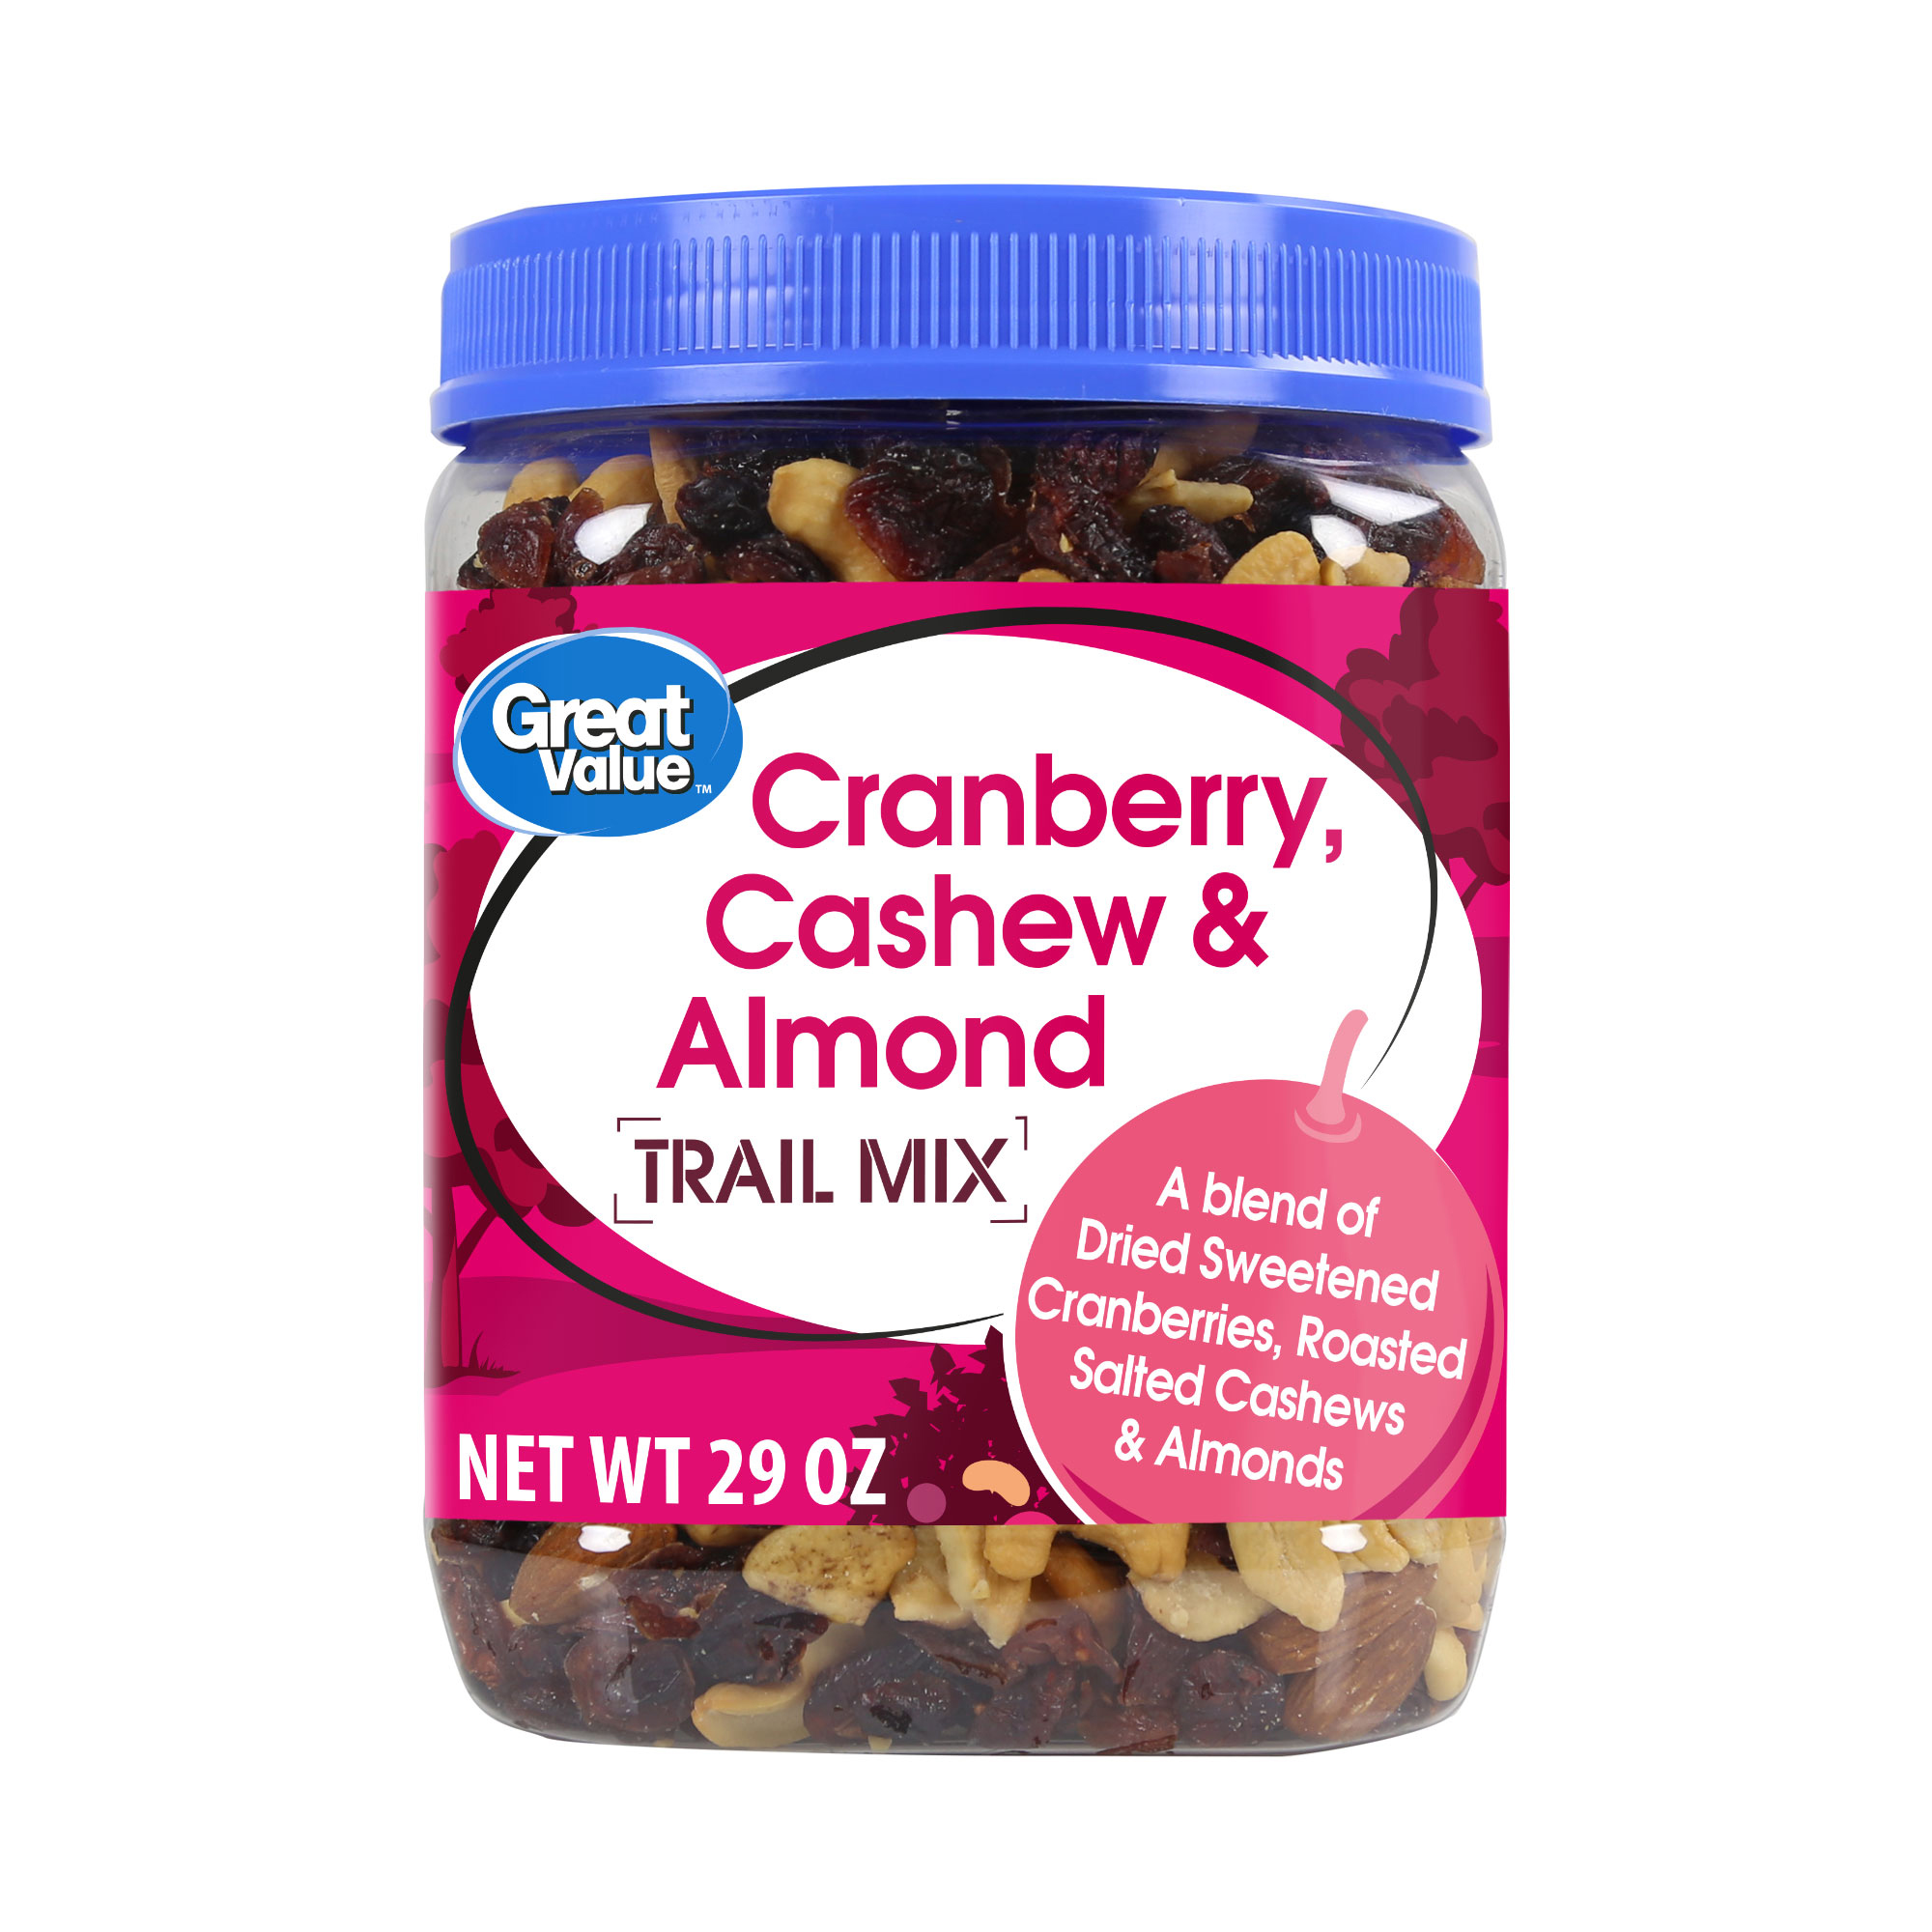 Great Value Cranberry, Cashew & Almond Trail Mix, 29 oz - image 1 of 6